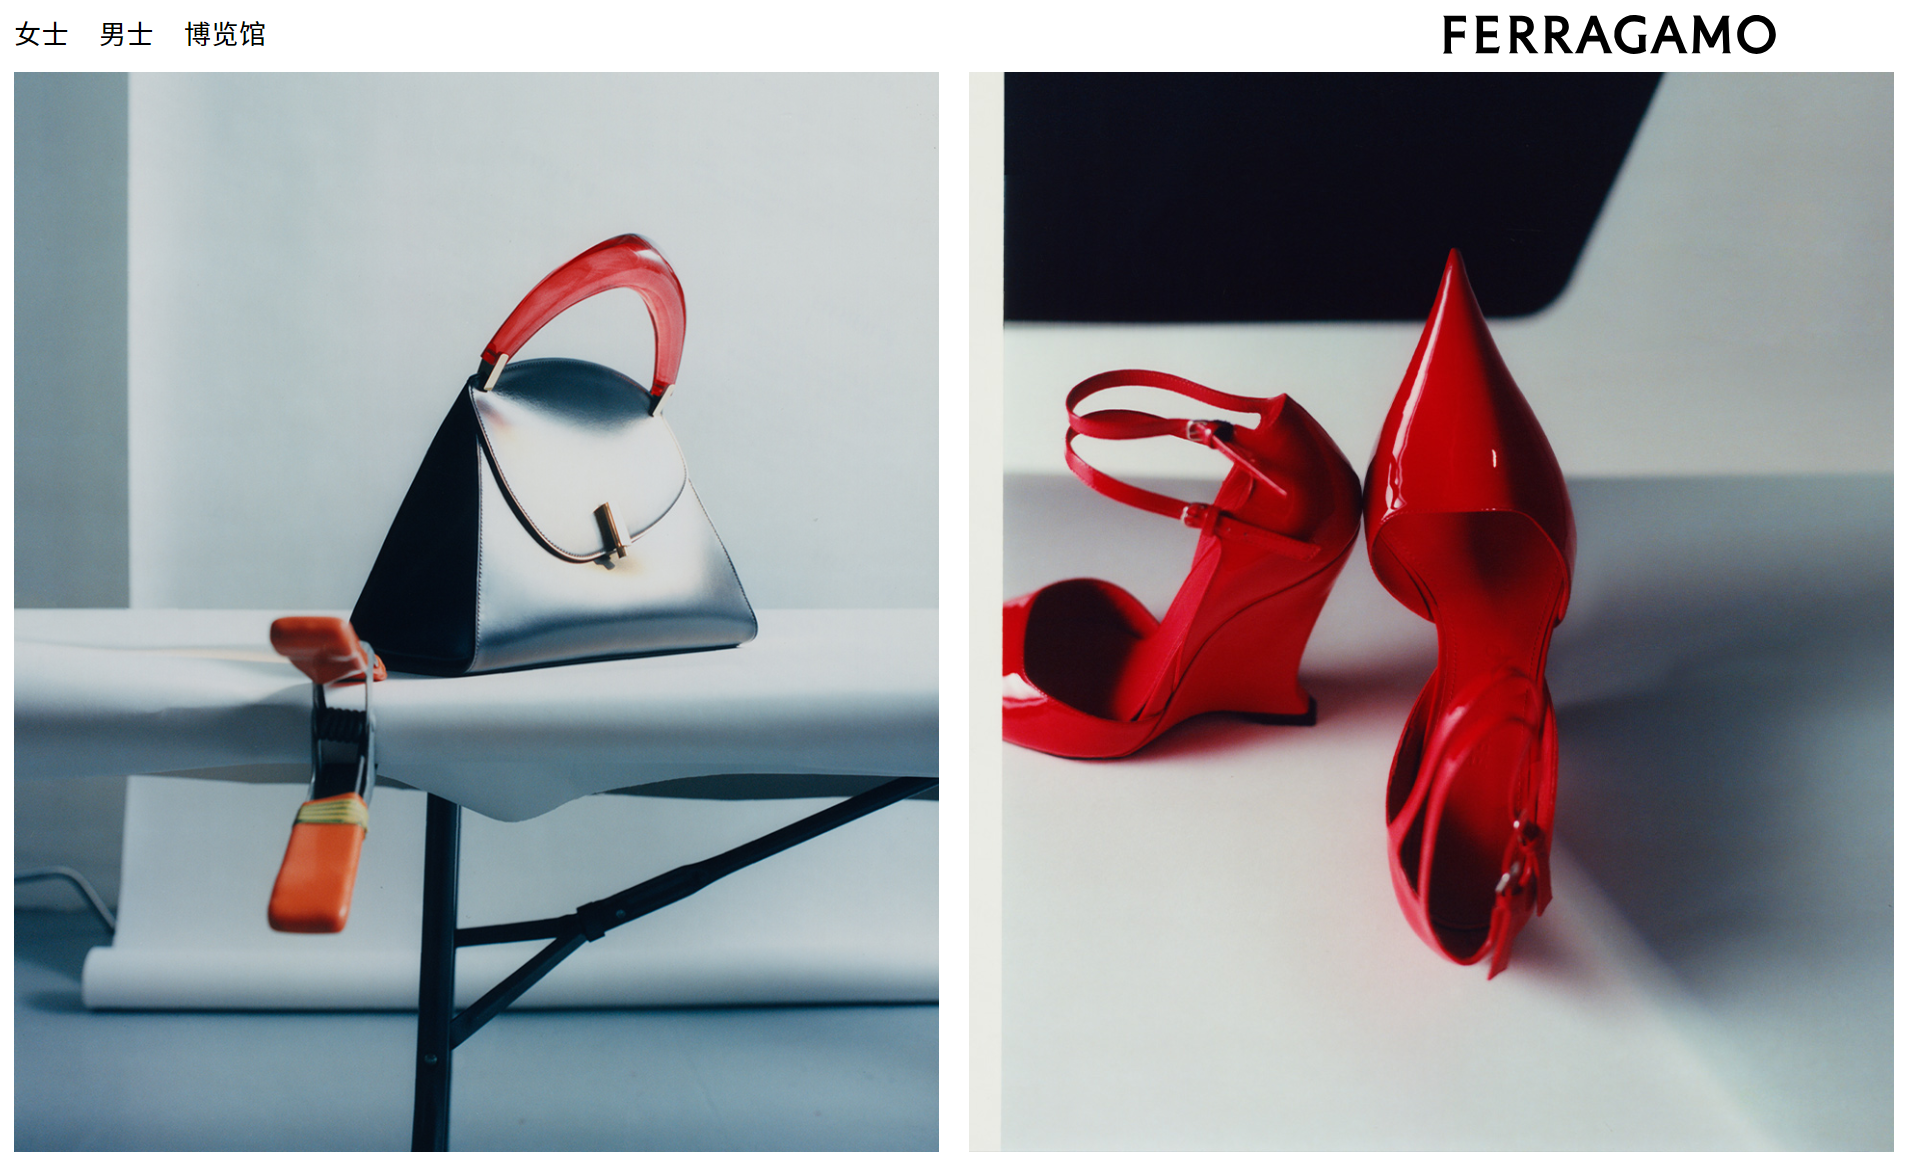 Ferragamo Acquires Remaining Stake in ImagineX’s Joint Ventures, Resumes Greater China Operations